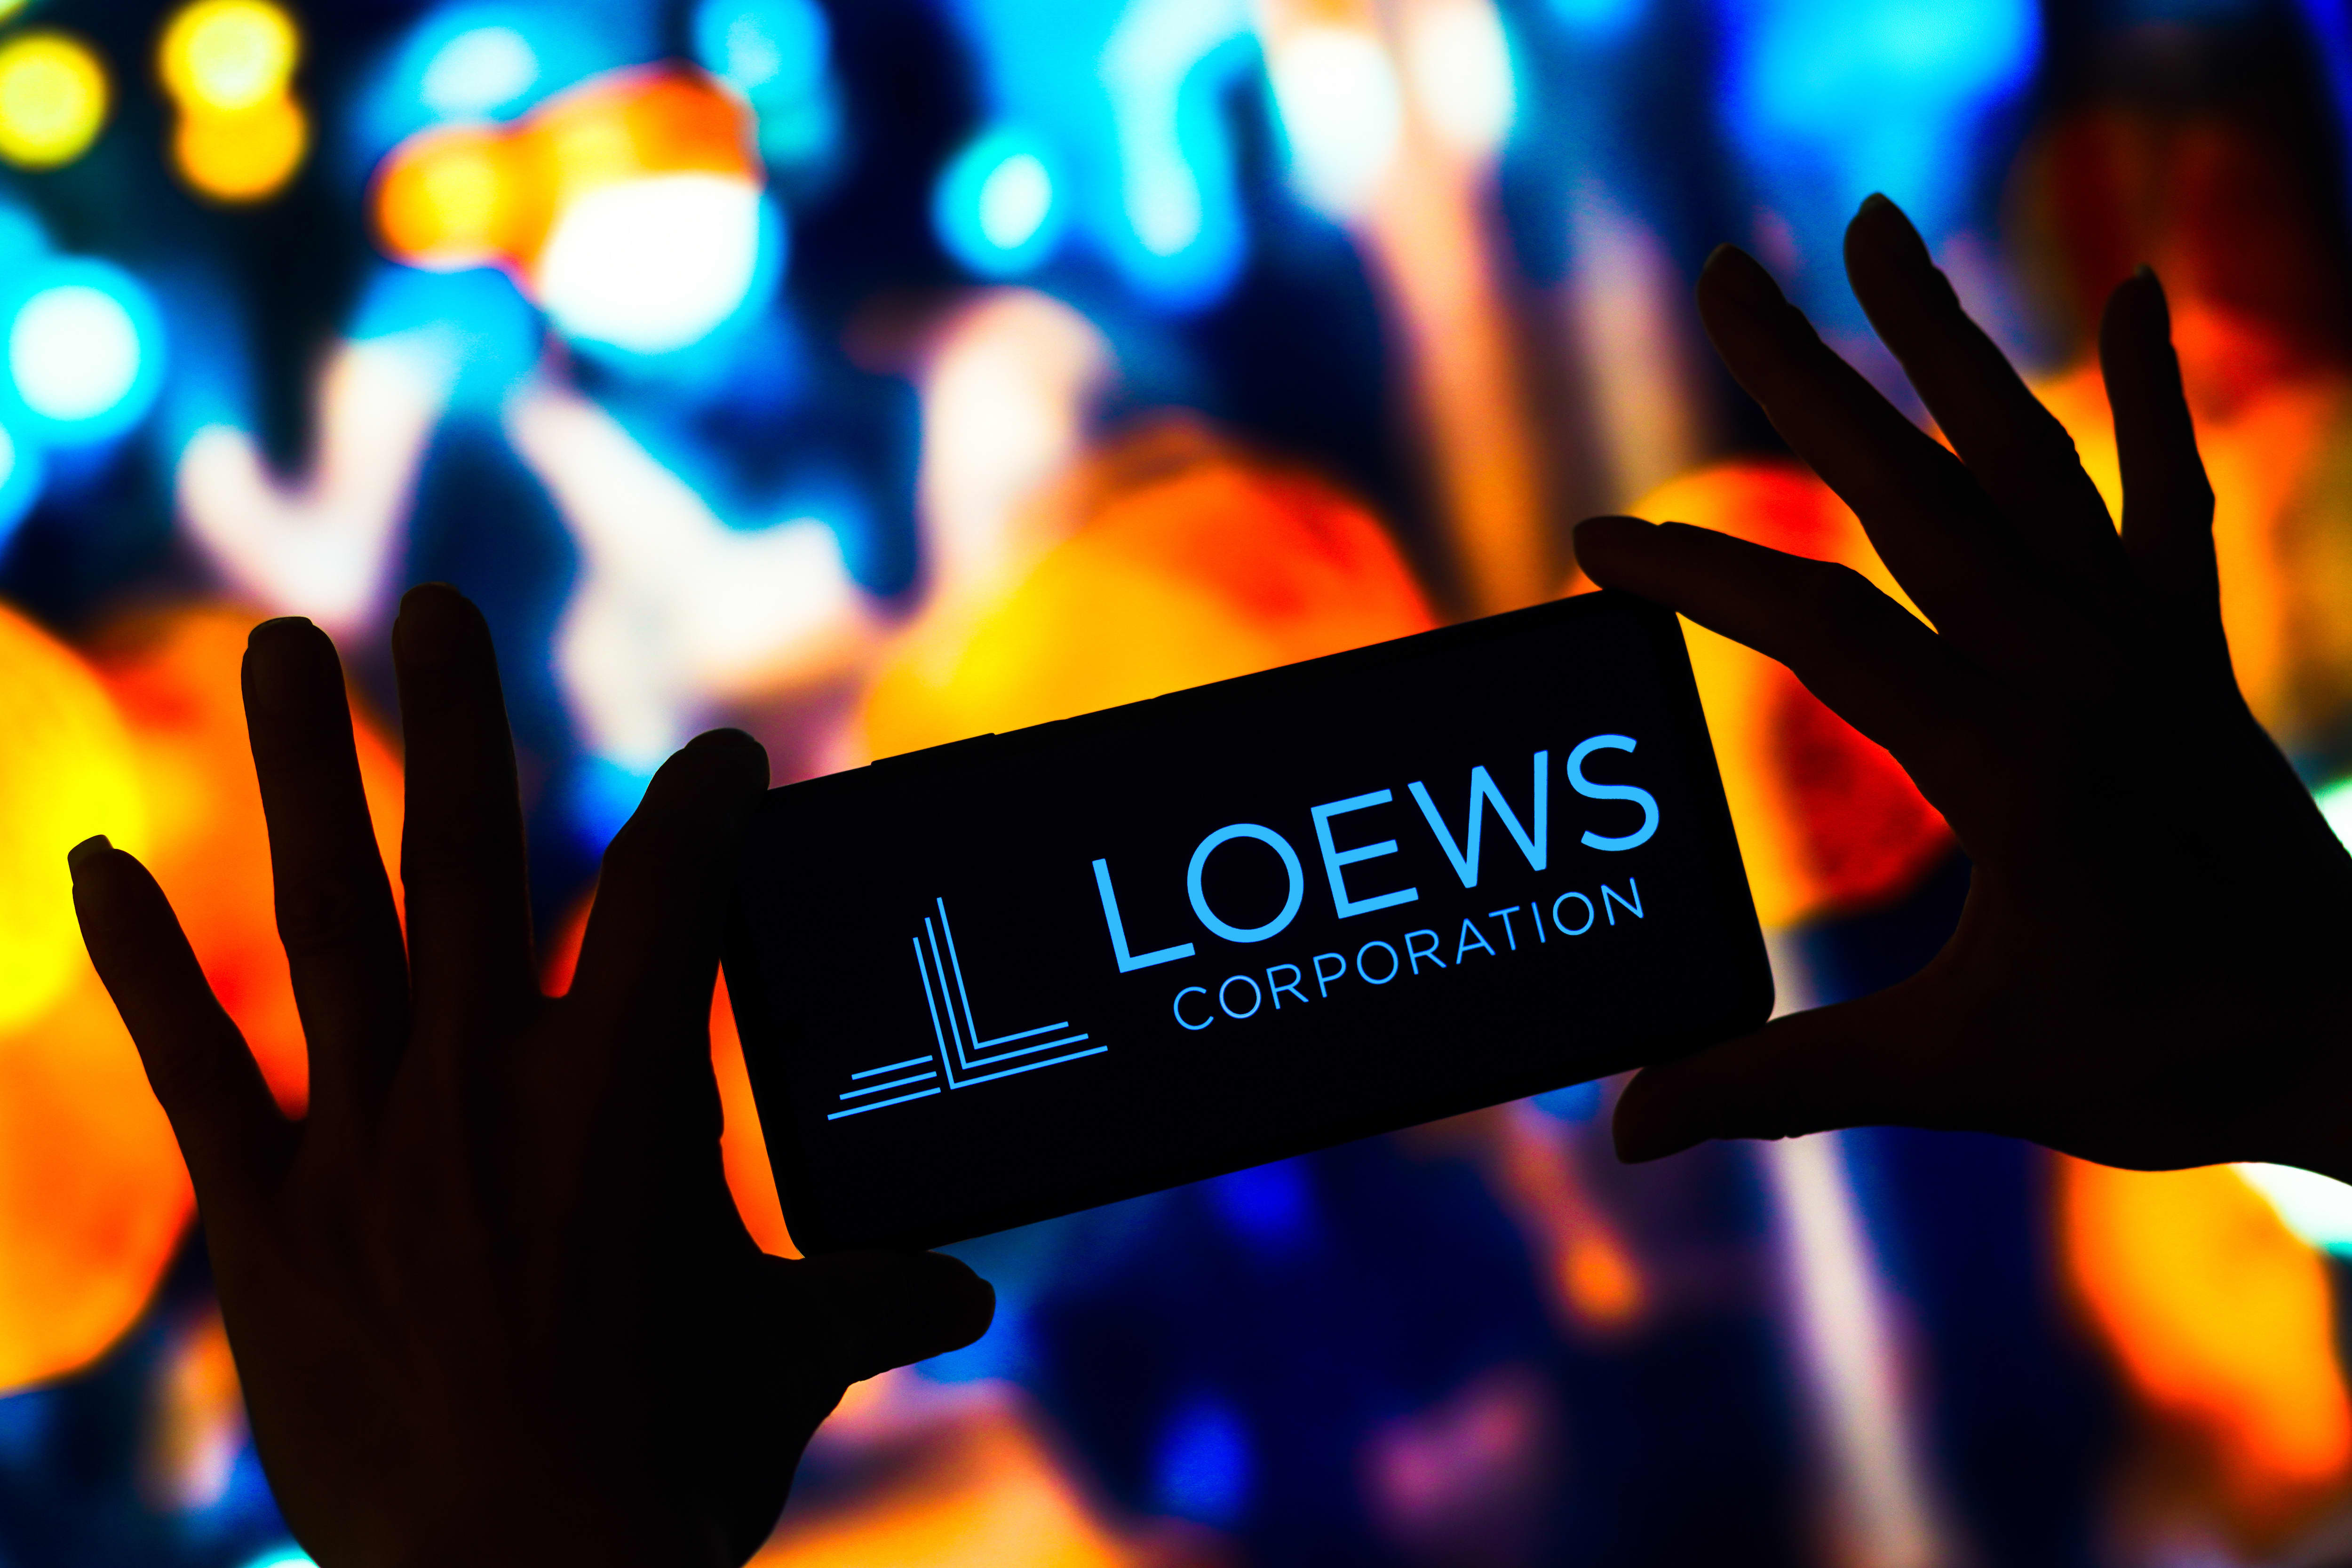 Insider buying: A Tisch family member buys up almost $20 million of Loews stock